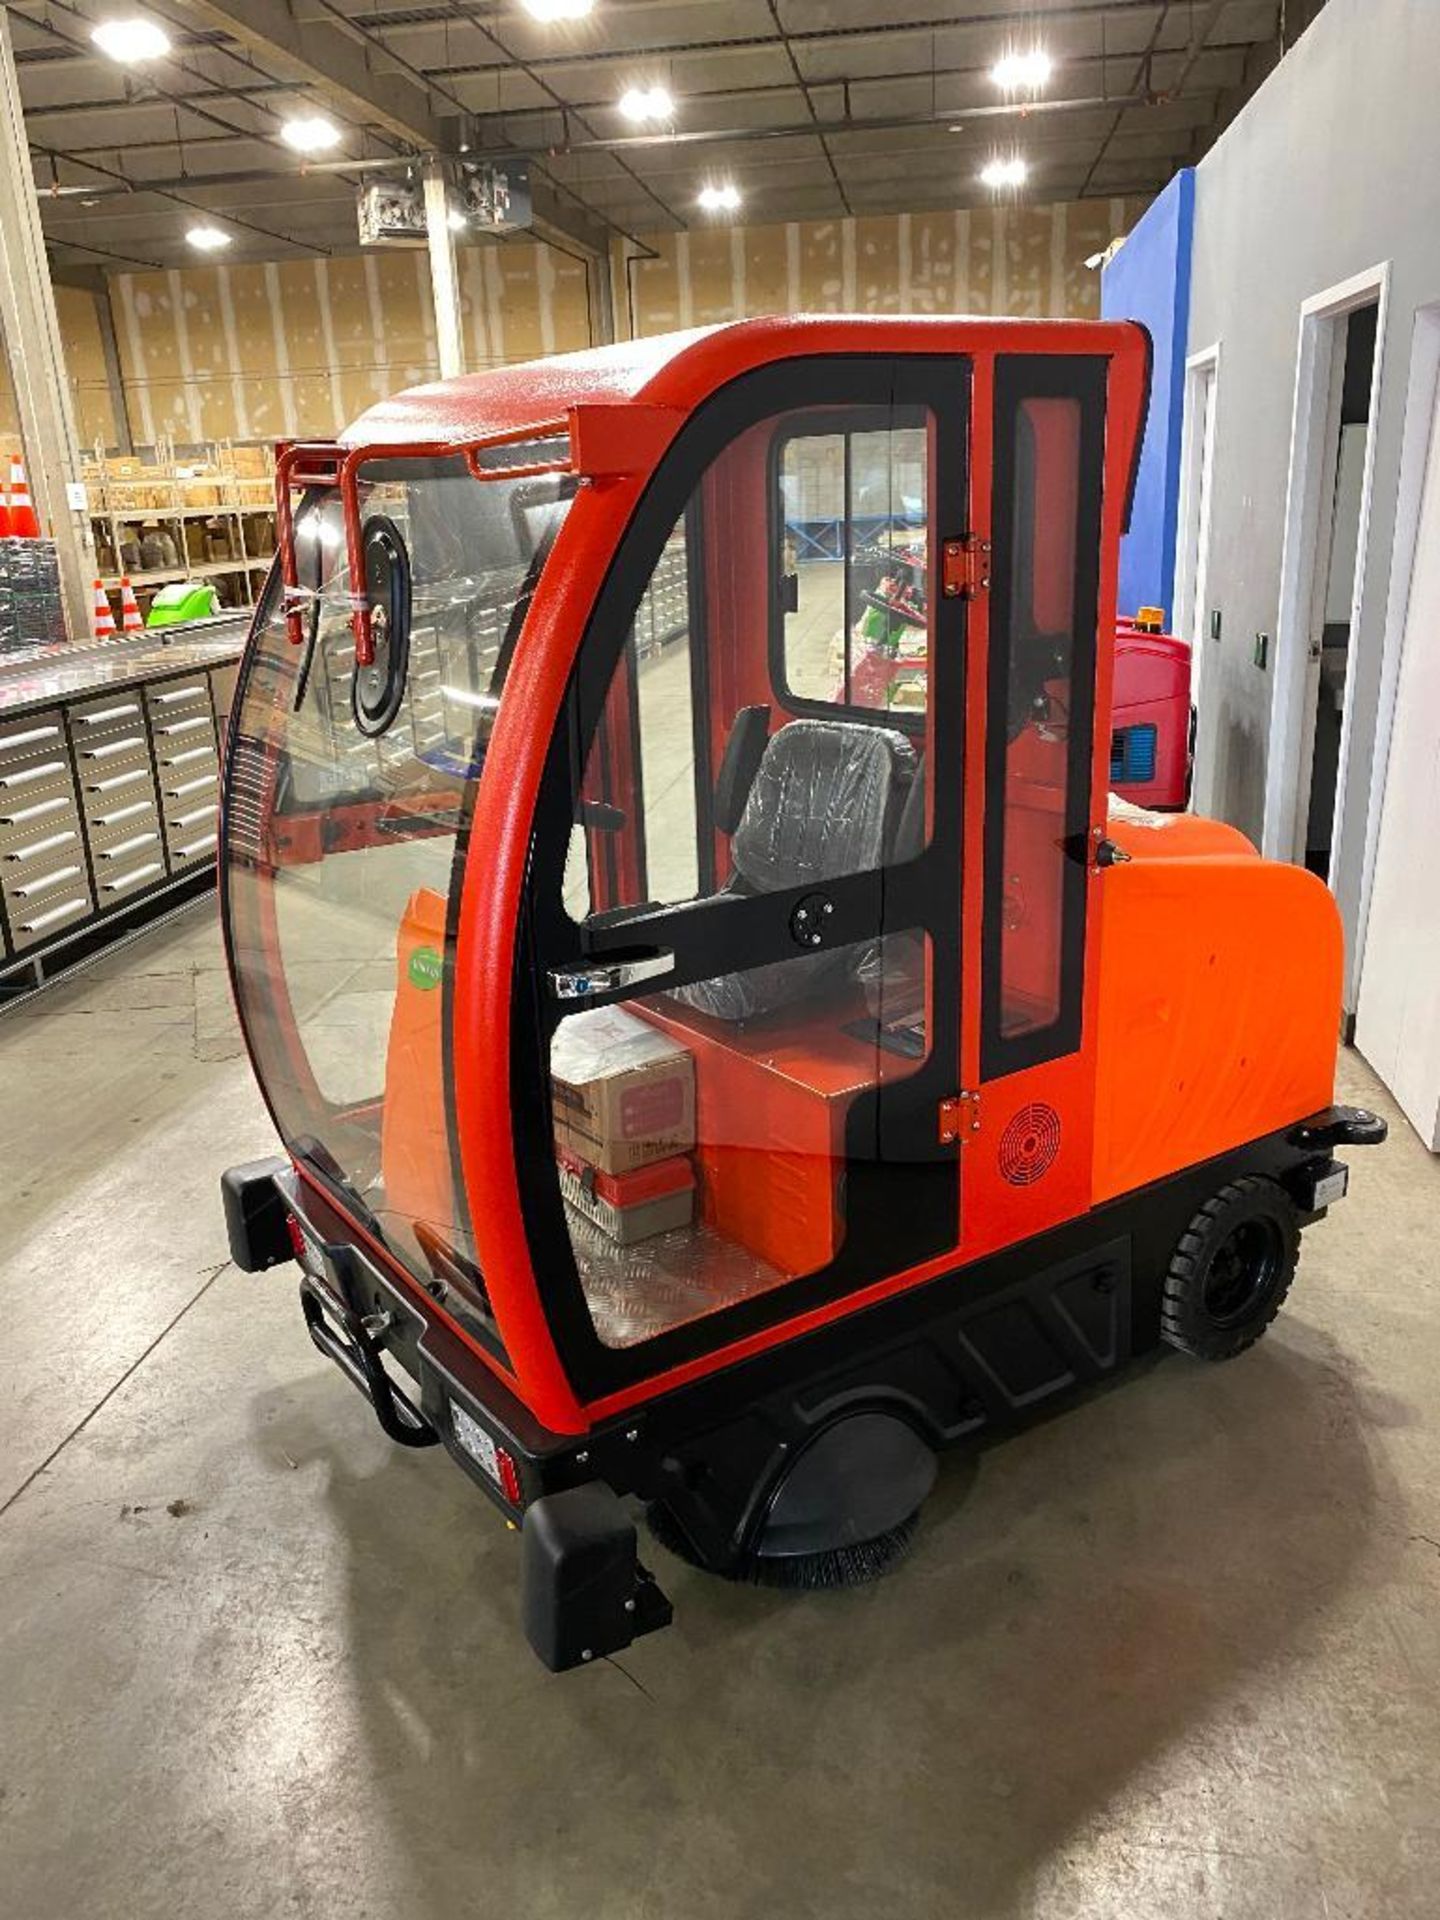 New 2022 Aokeqi 0S-V5 72" Wide Ride-On Electric Industrial Floor Sweeper - Image 2 of 12